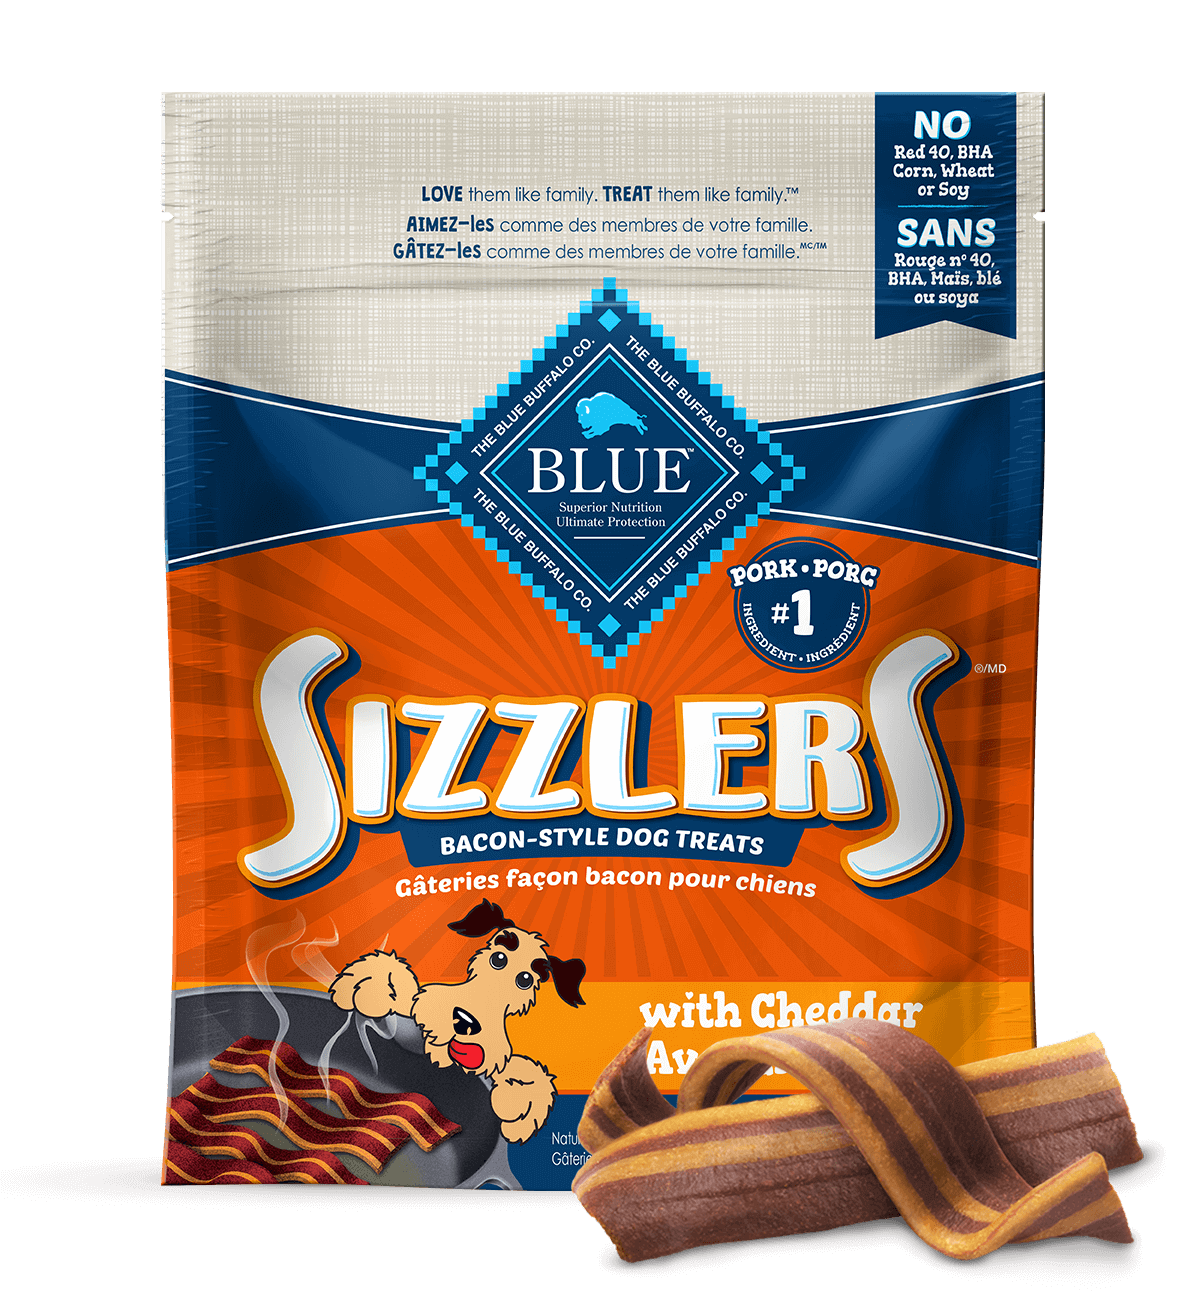 blue sizzlers bacon-style dog treats with cheddar dog treats